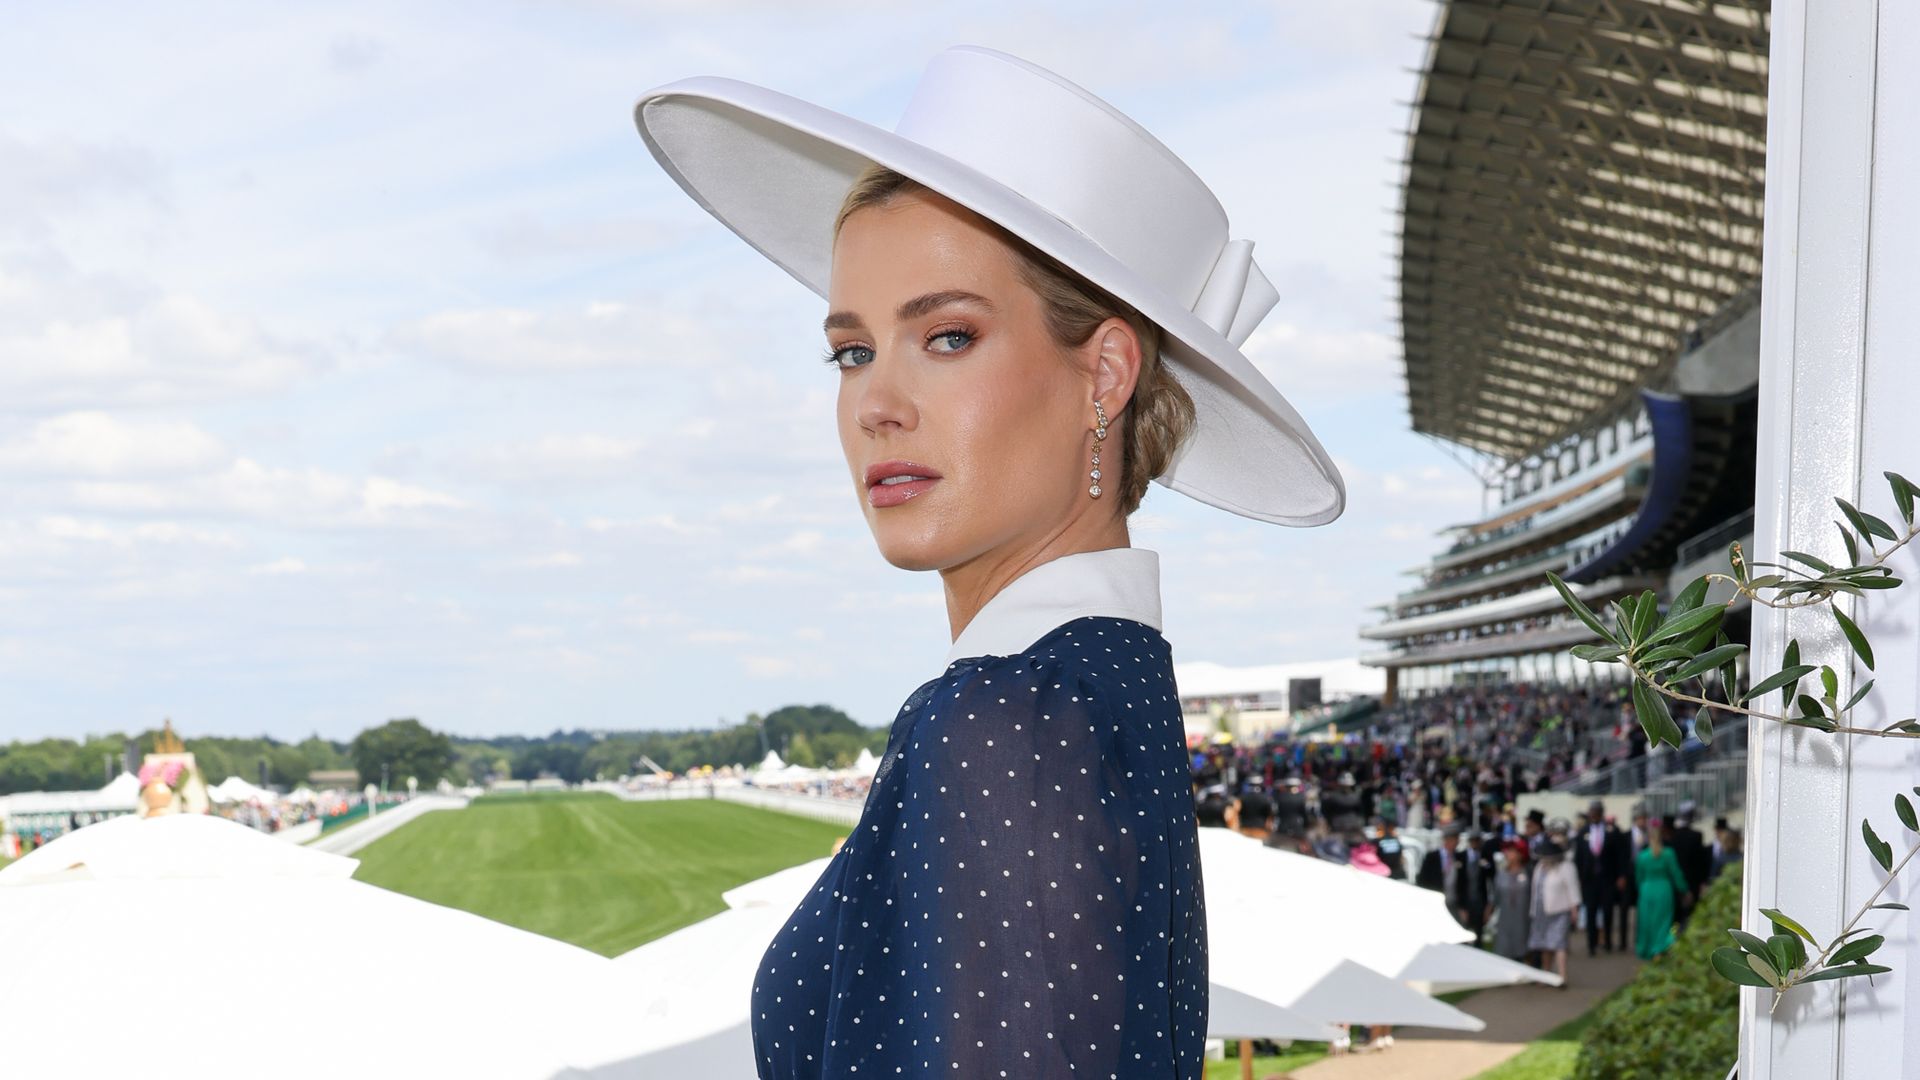 Lady Amelia Spencer in navy polka dot dress and white hat